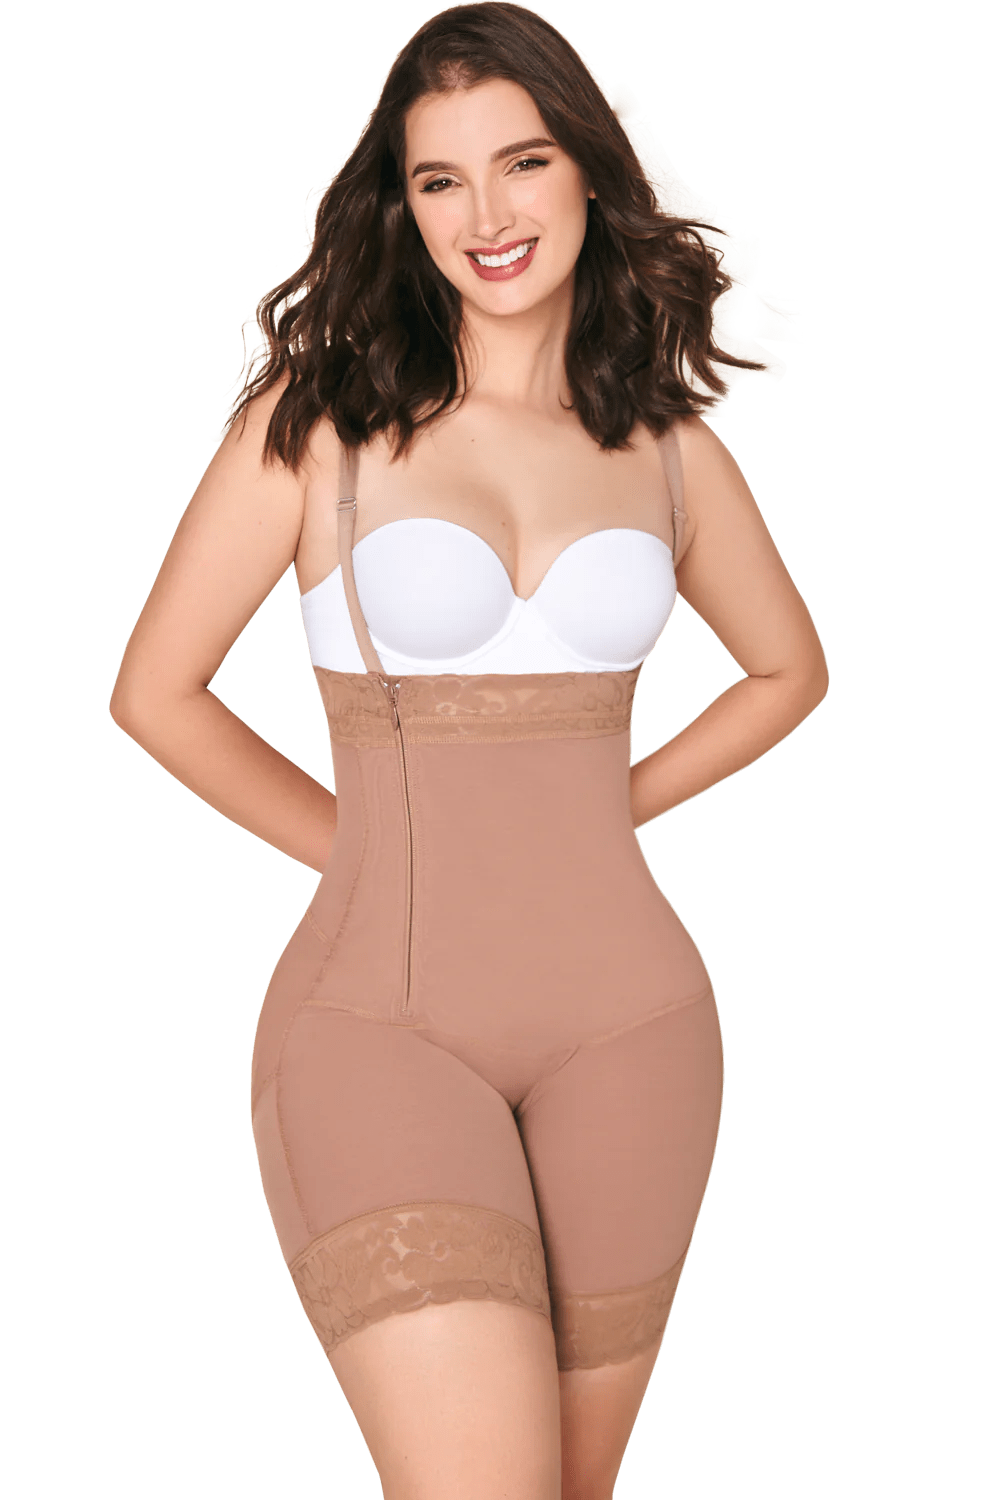 Ily Clothing Shapwear Strapless Body Shaper with Zipper